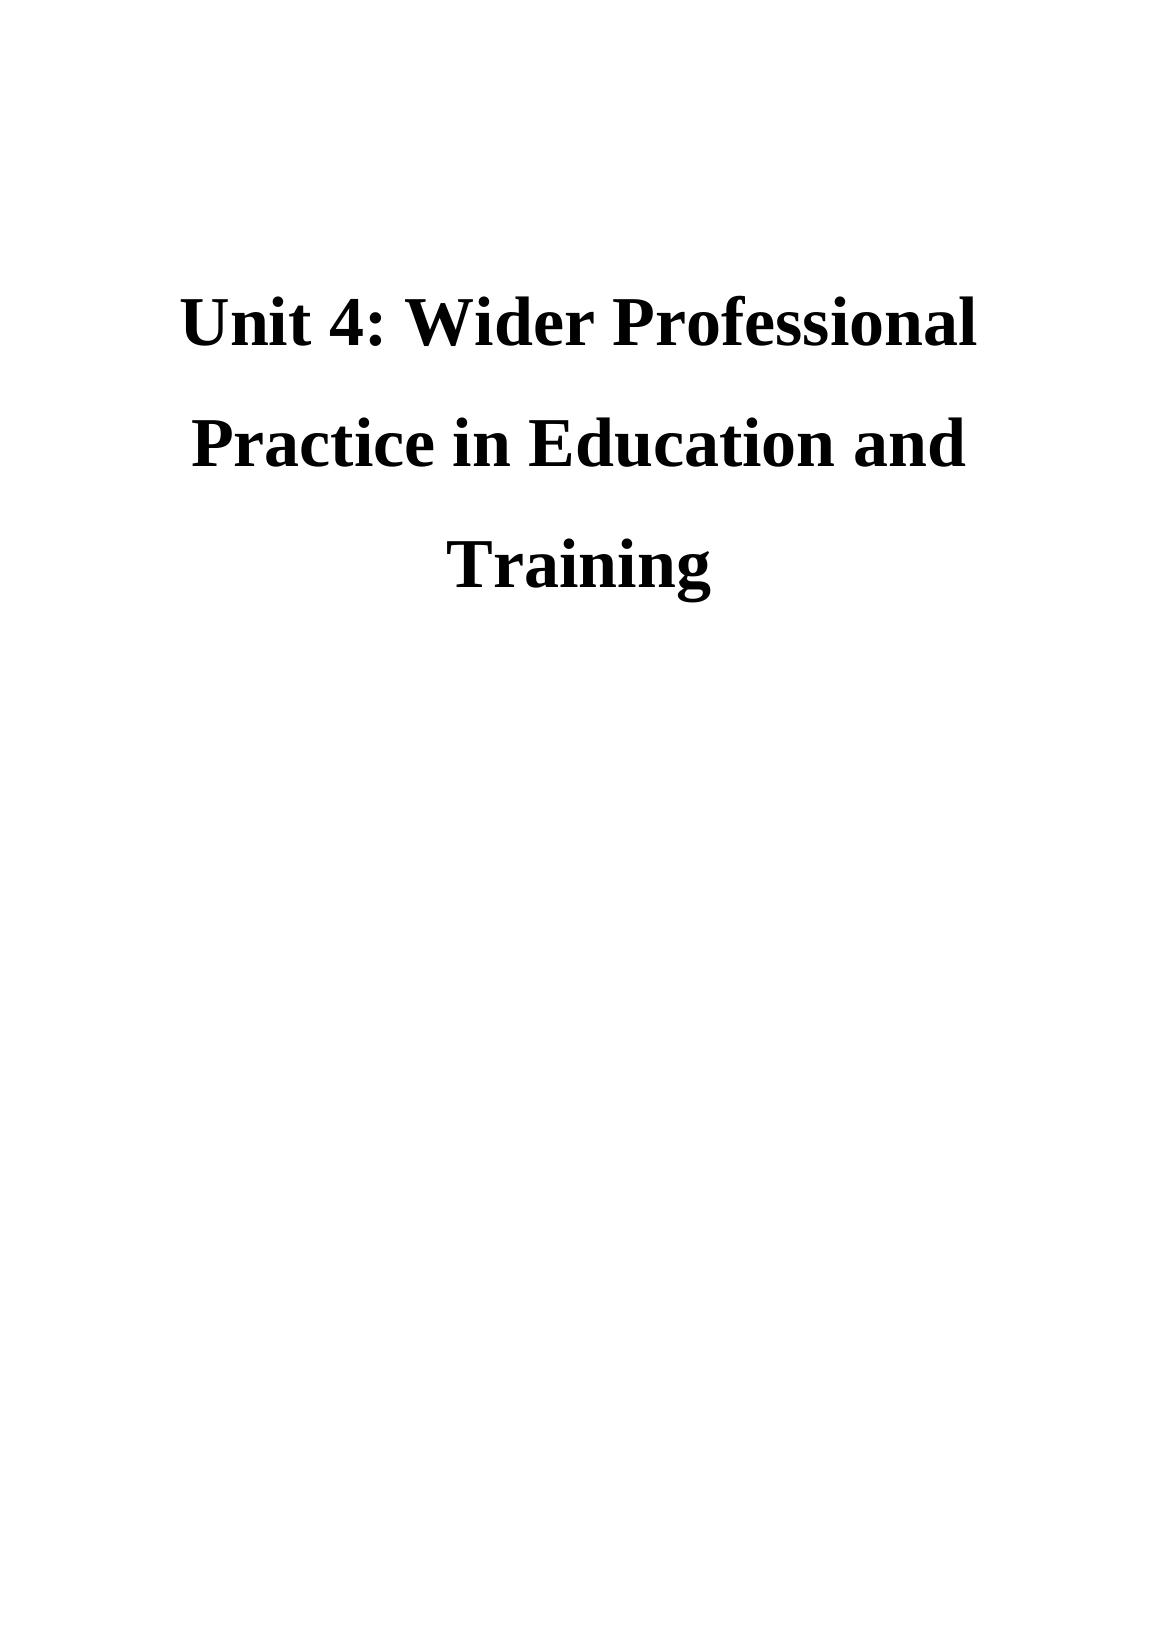 Wider Professional Practice in Education and Training_1